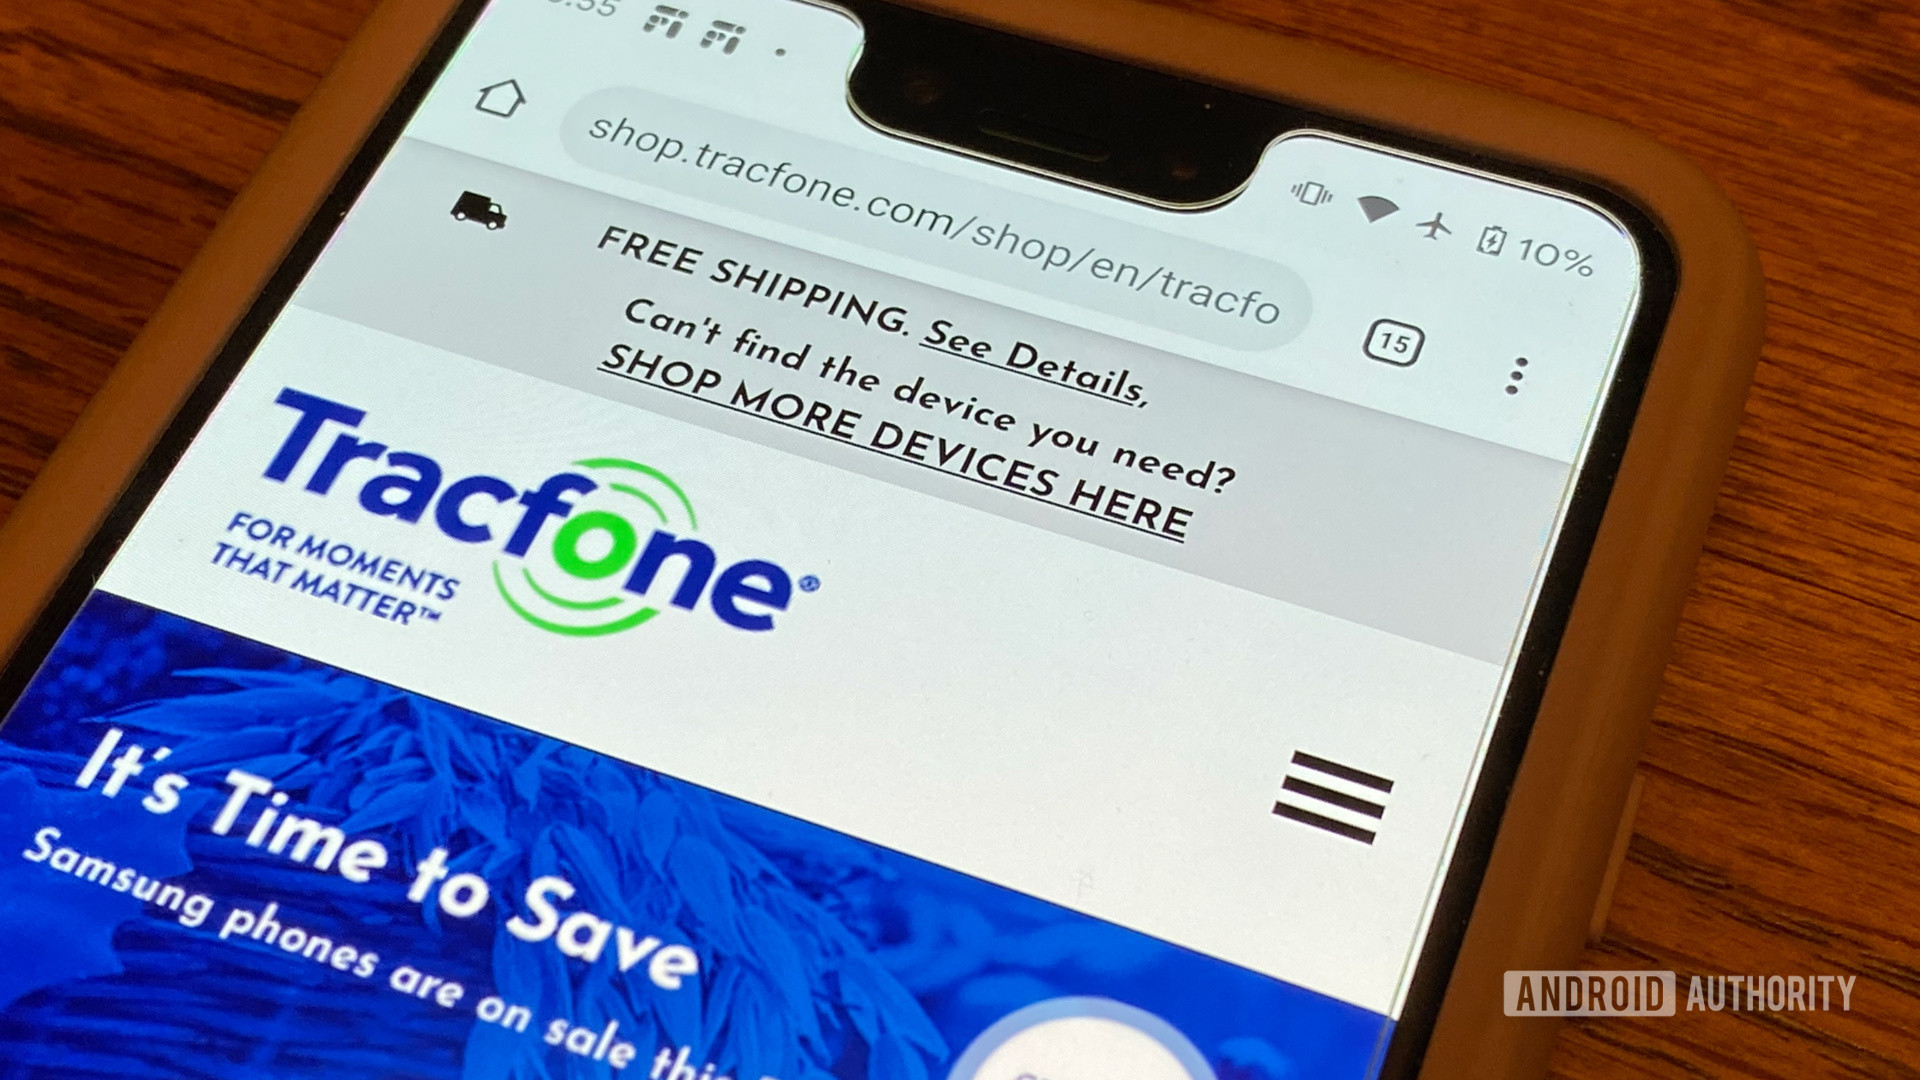 Image of the Tracfone Wireless website